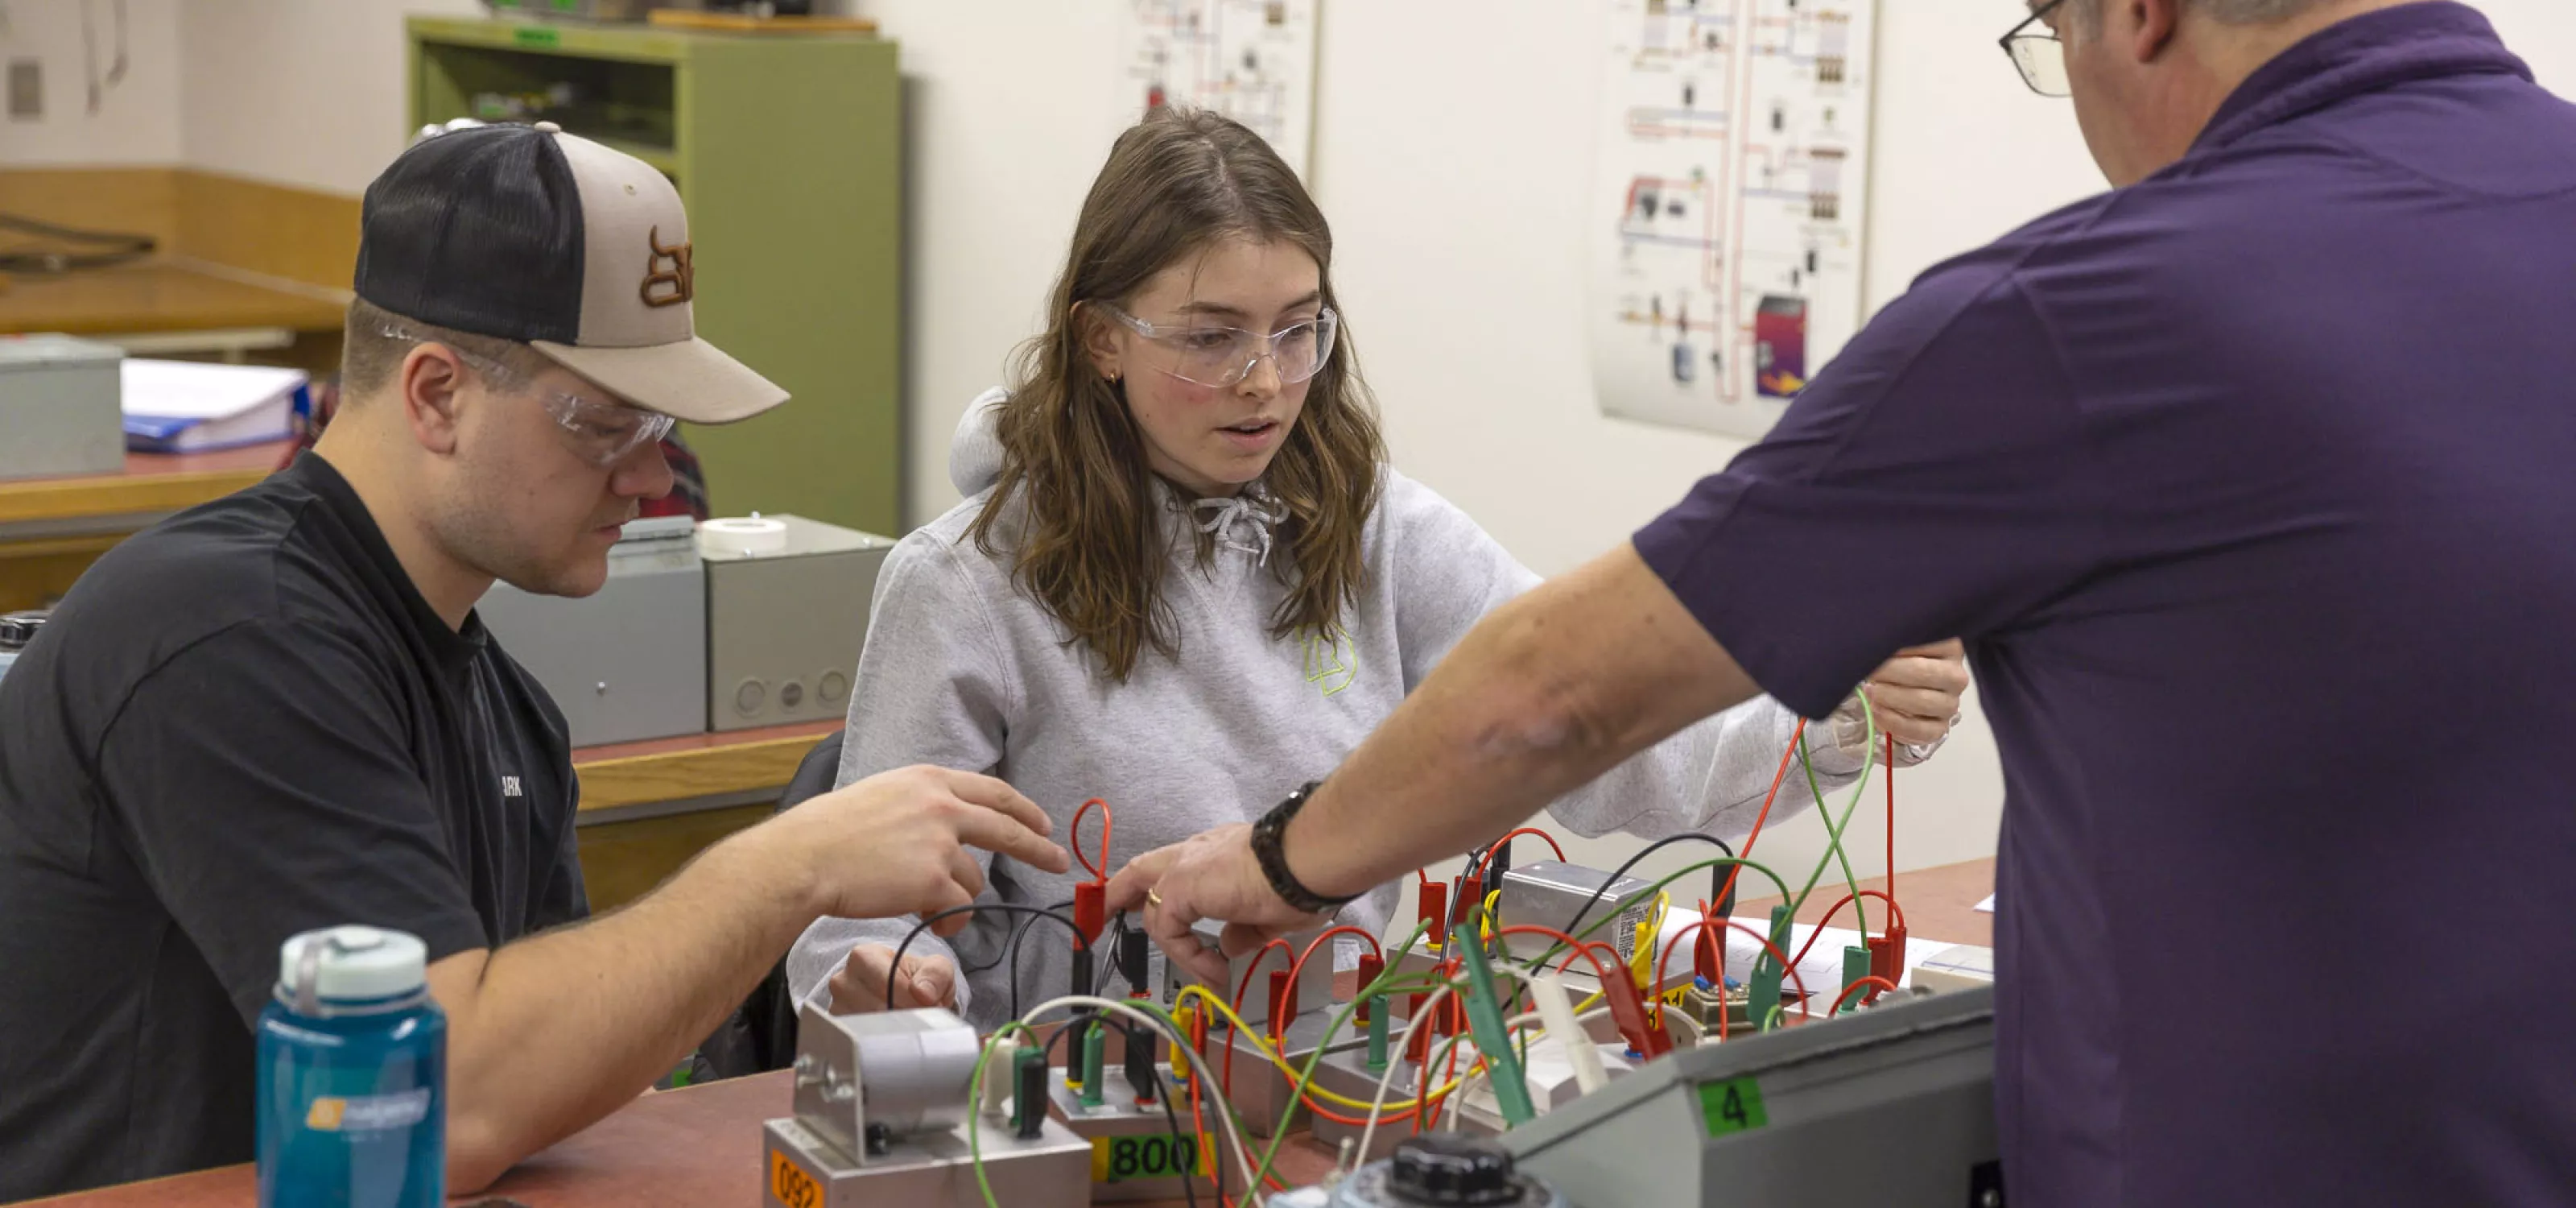 Electrical instructor hooking wires with two students